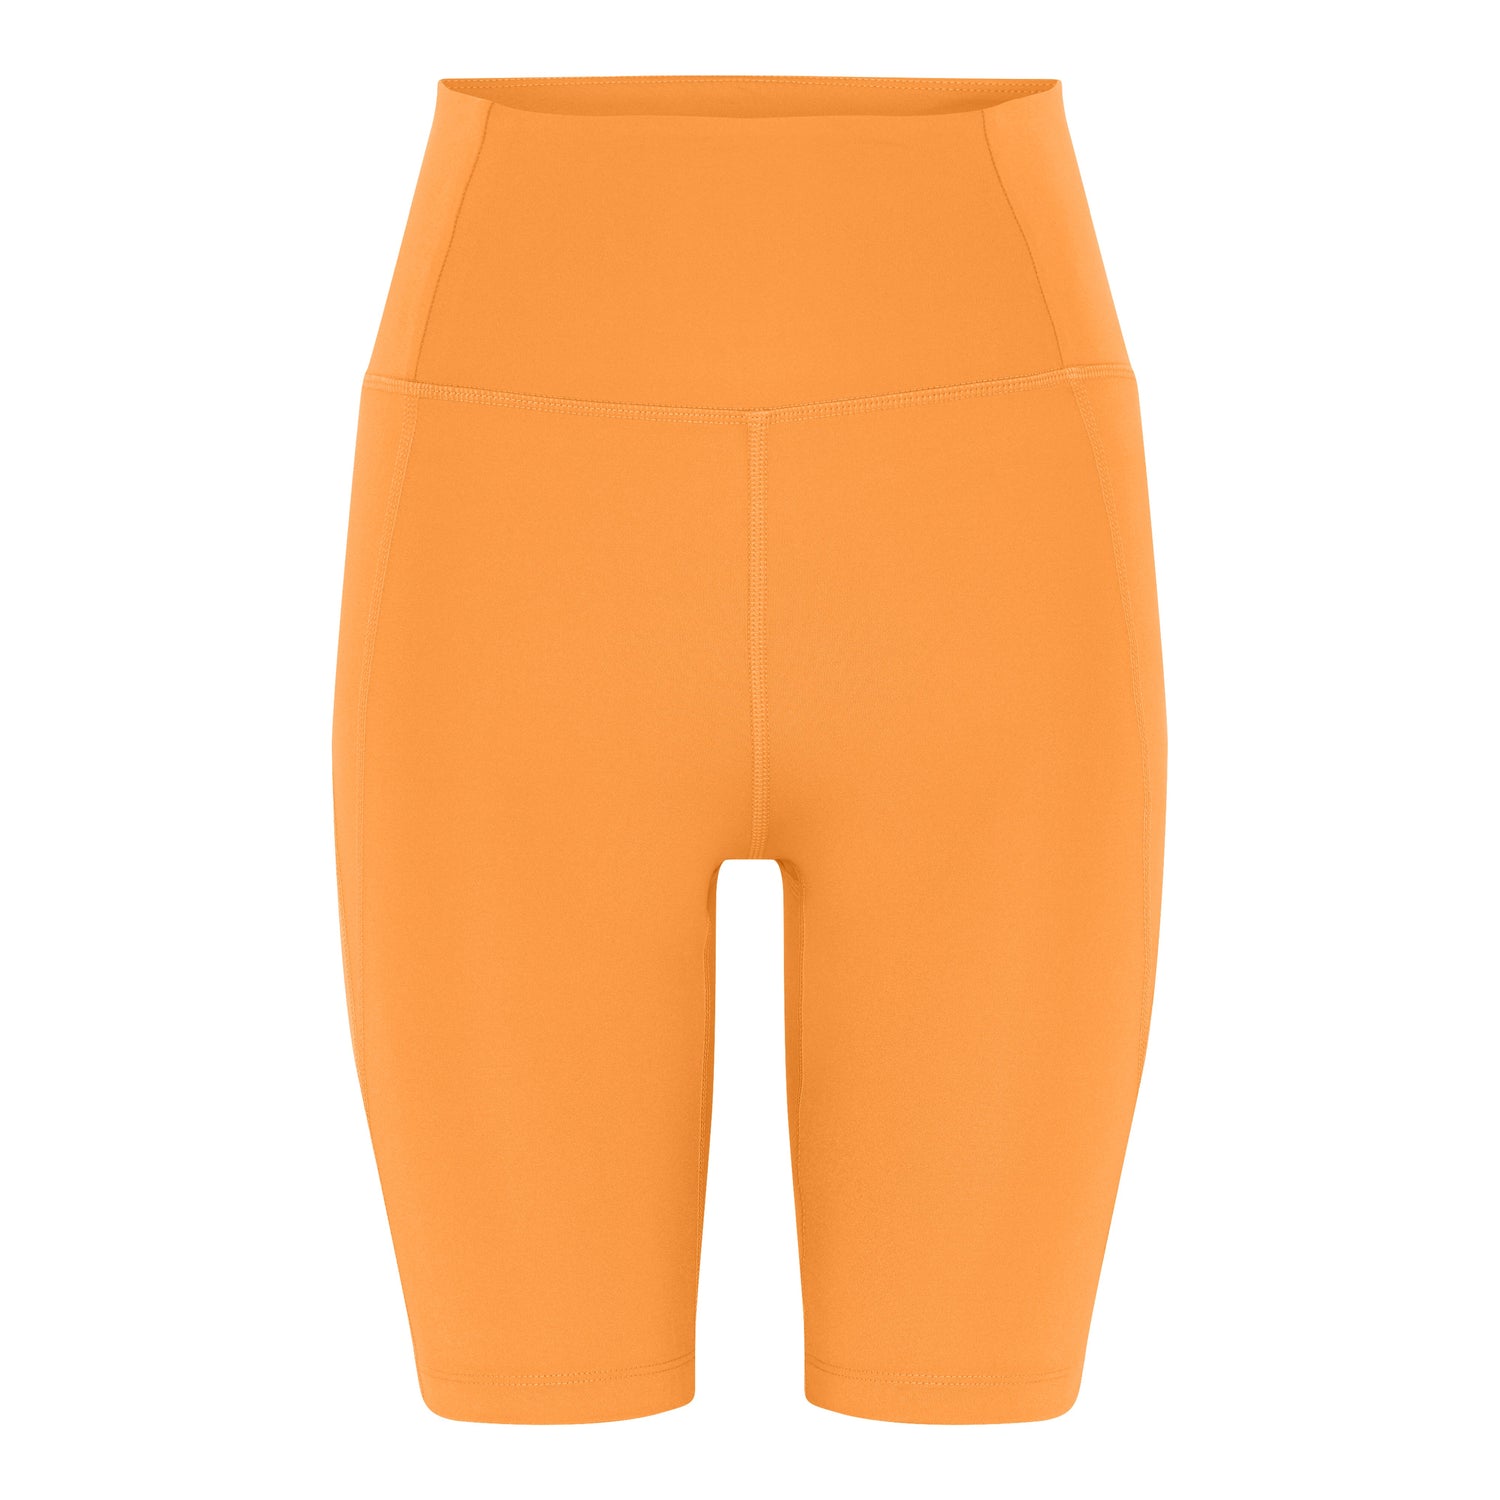 Girlfriend Collective Bike Shorts - Made from recycled plastic bottles Orange Zest Pants